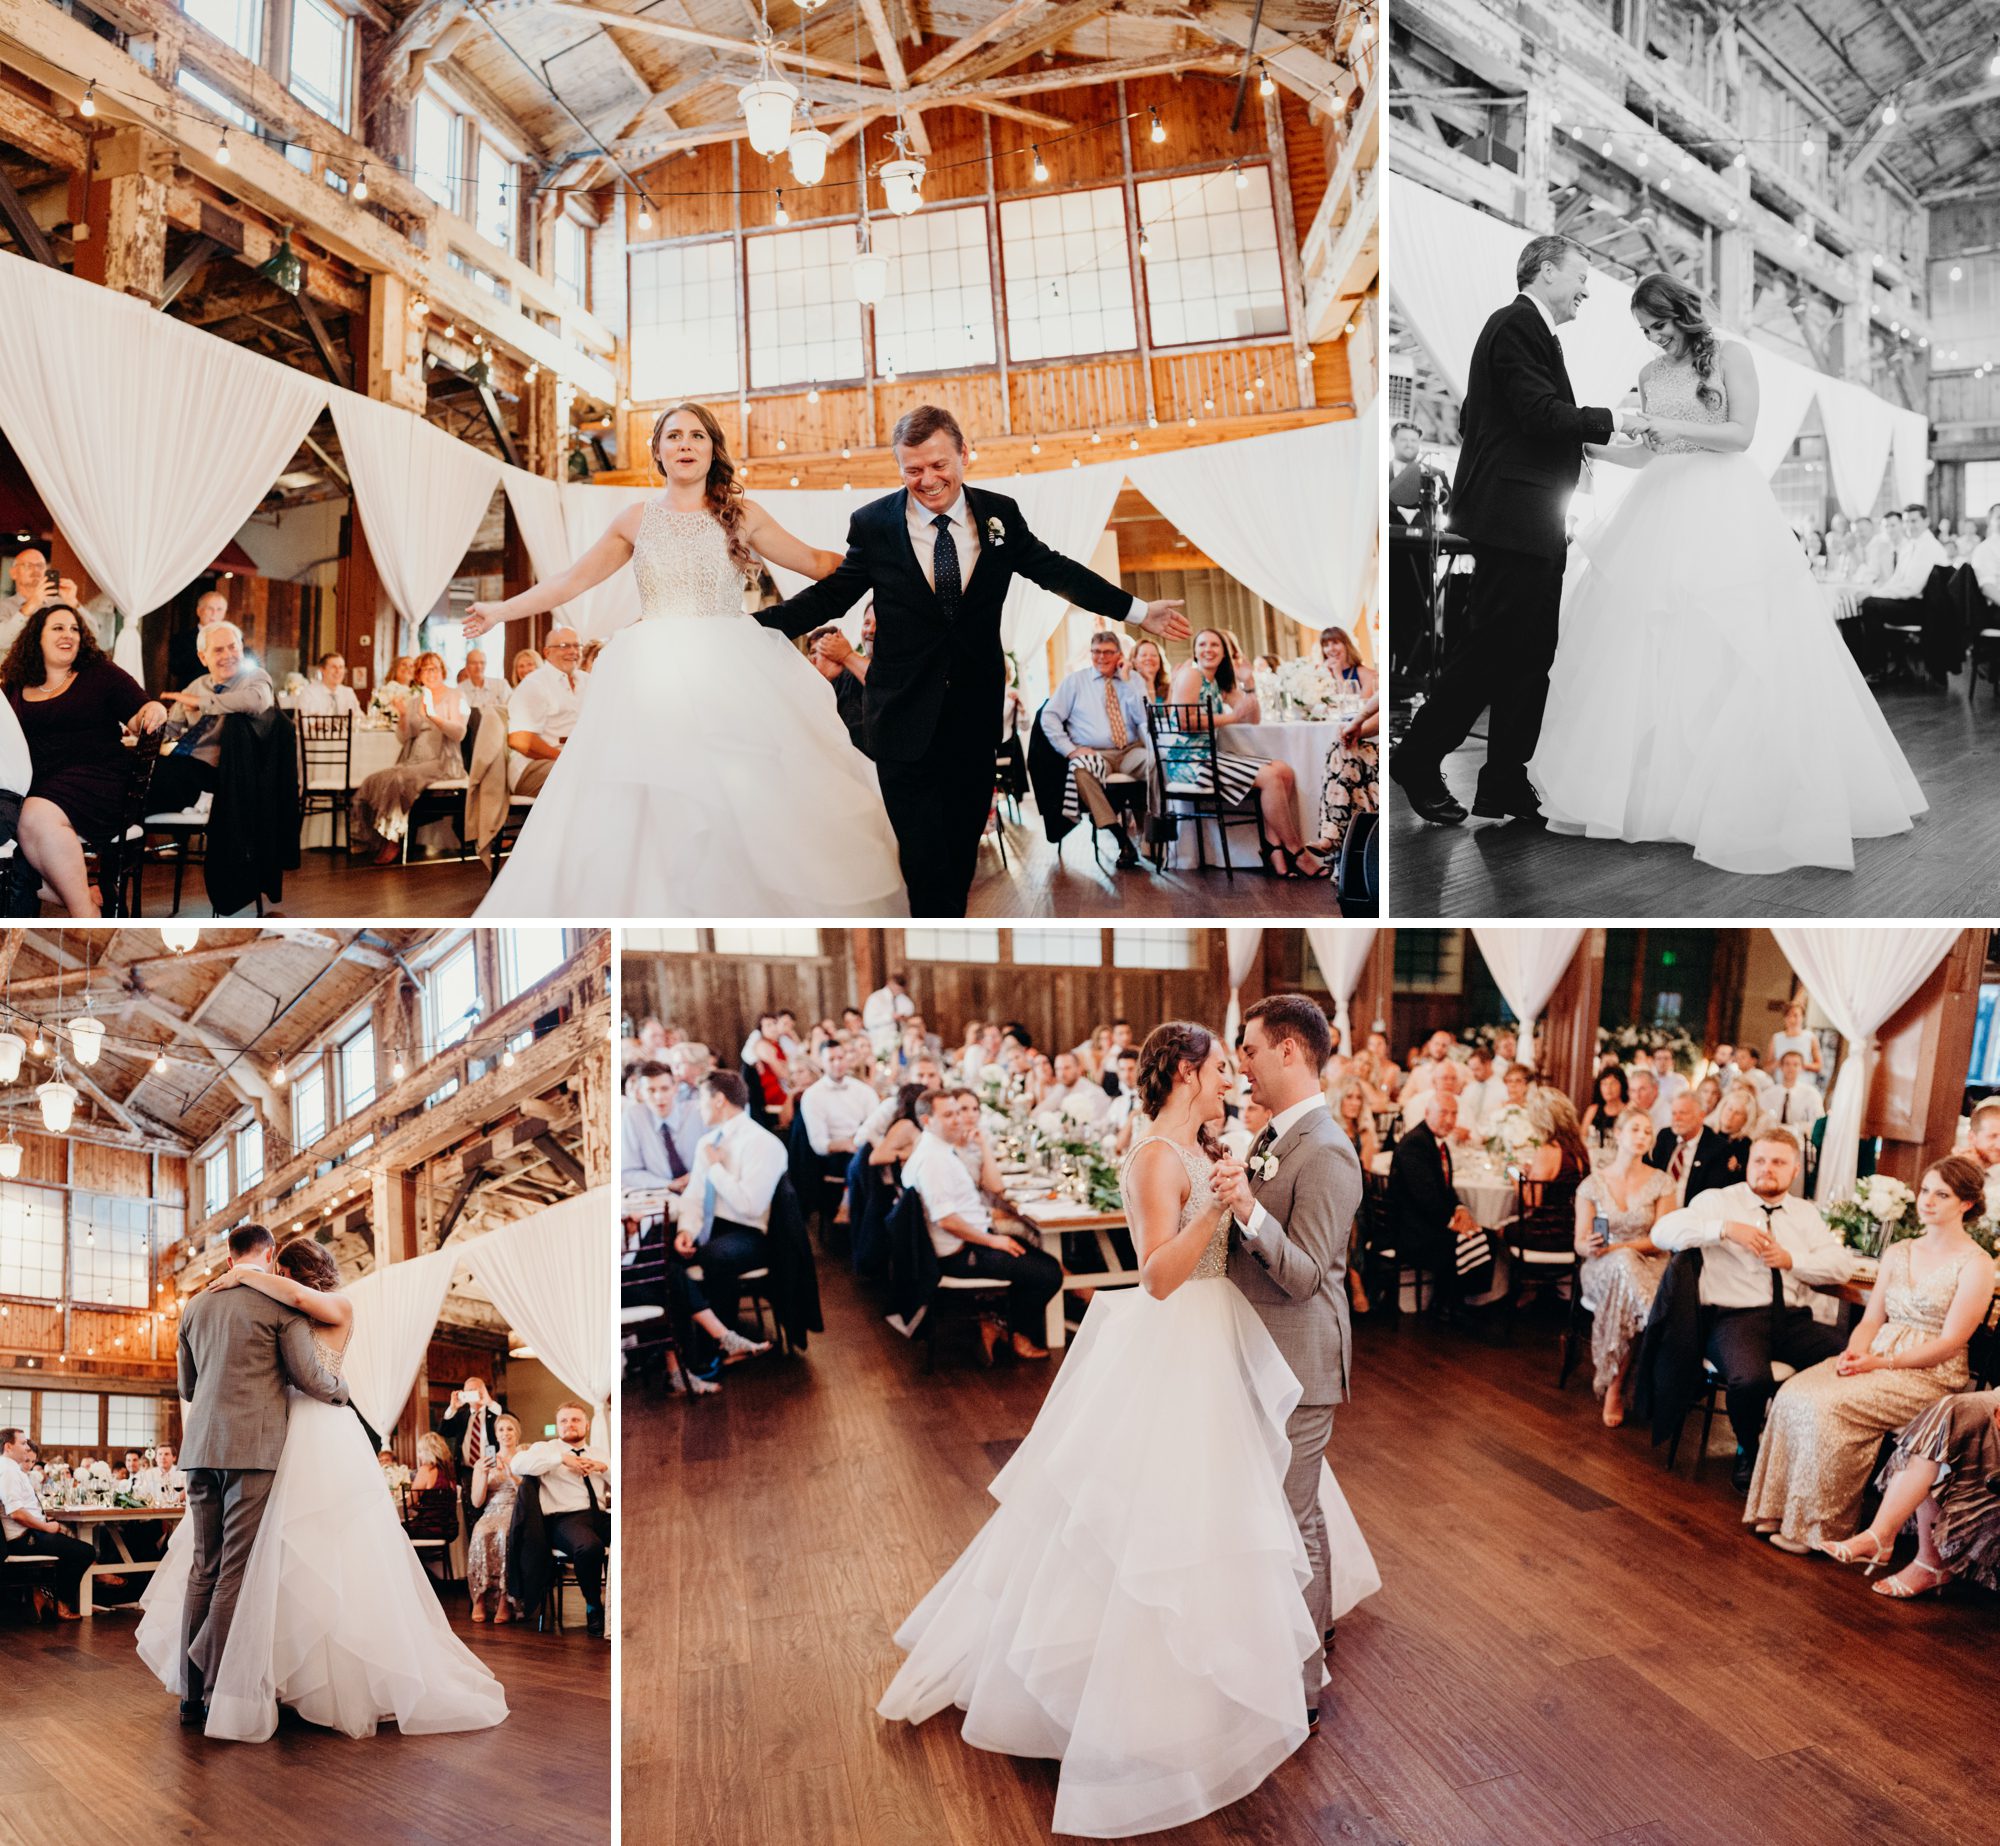 The father-daughter dance and first dance with the newlyweds. By Seattle, Washington wedding photographer Briana Morrison.